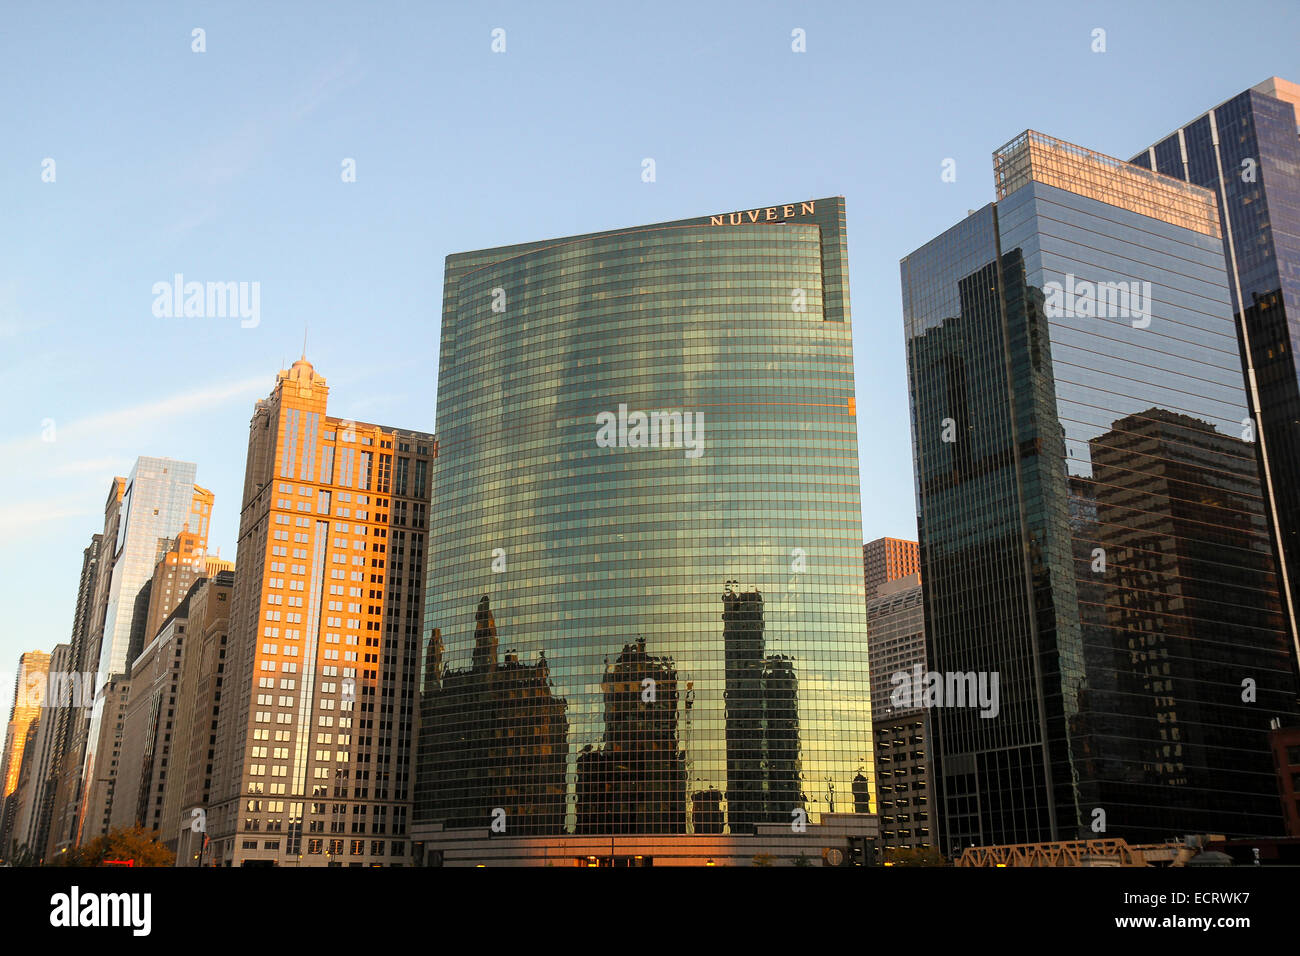 Chicago skyscrapers, including 333 Wacker Drive, designed by the firm Kohn Pederson Fox Assocates and completed in 1983. Stock Photo